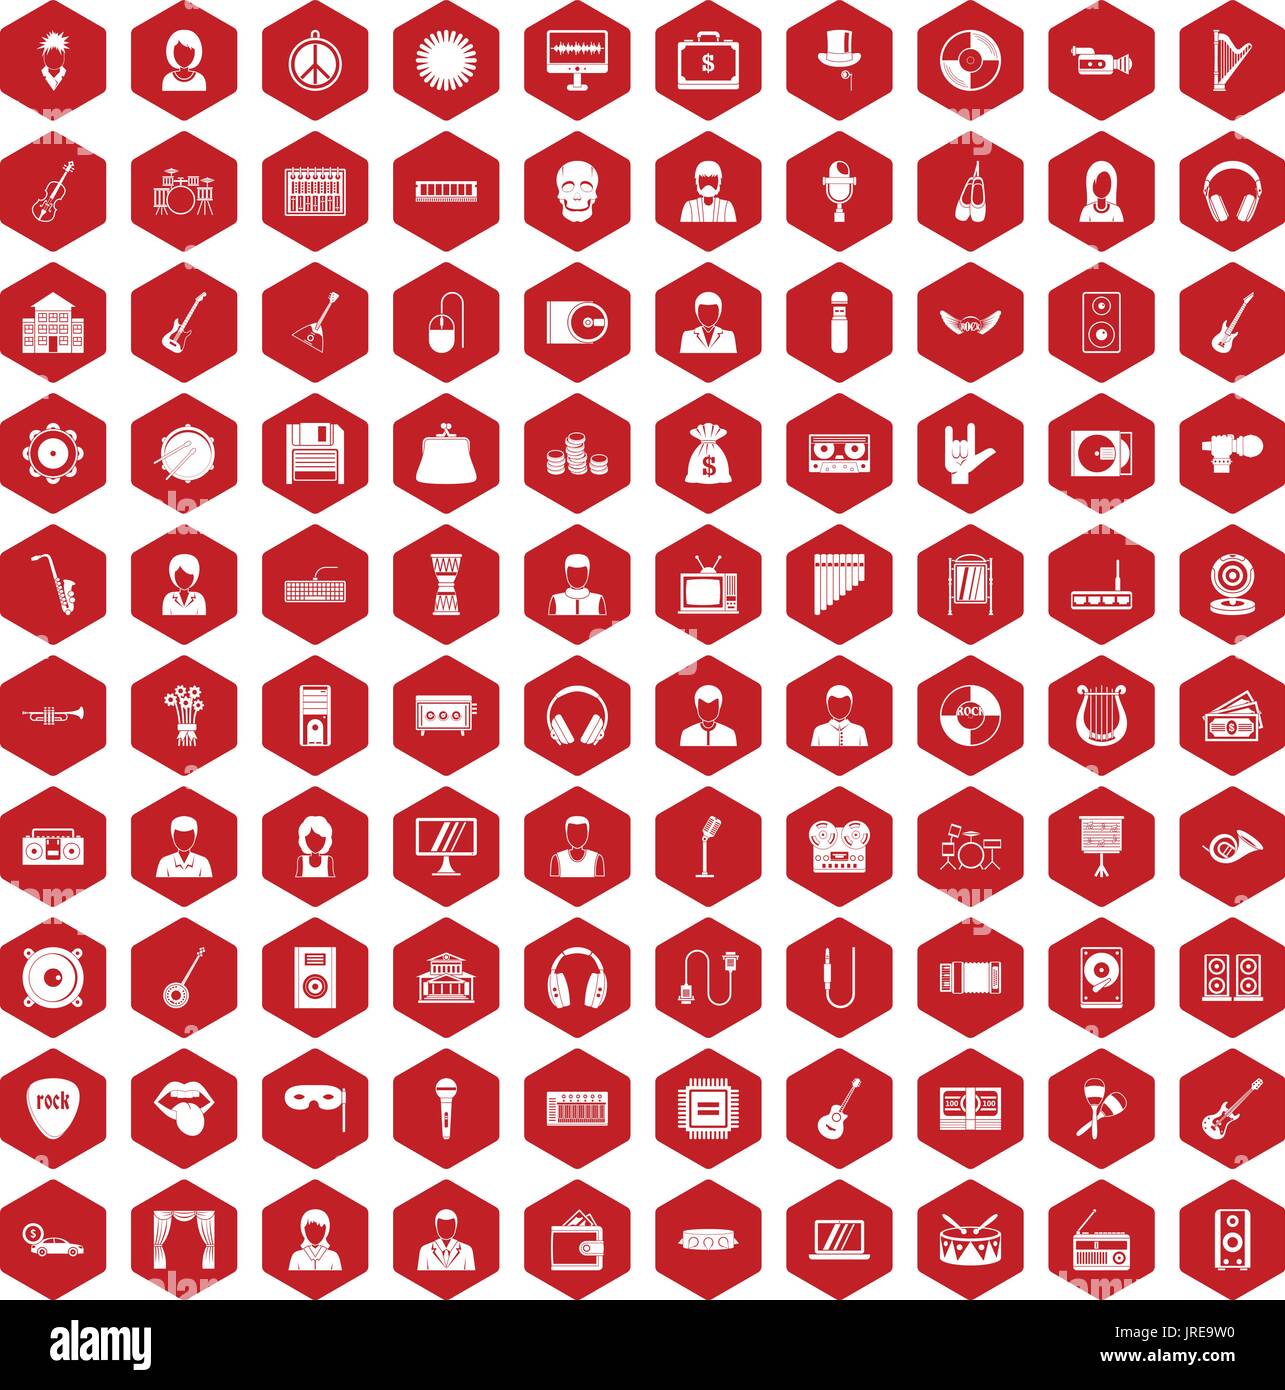 100 music icons hexagon red Stock Vector